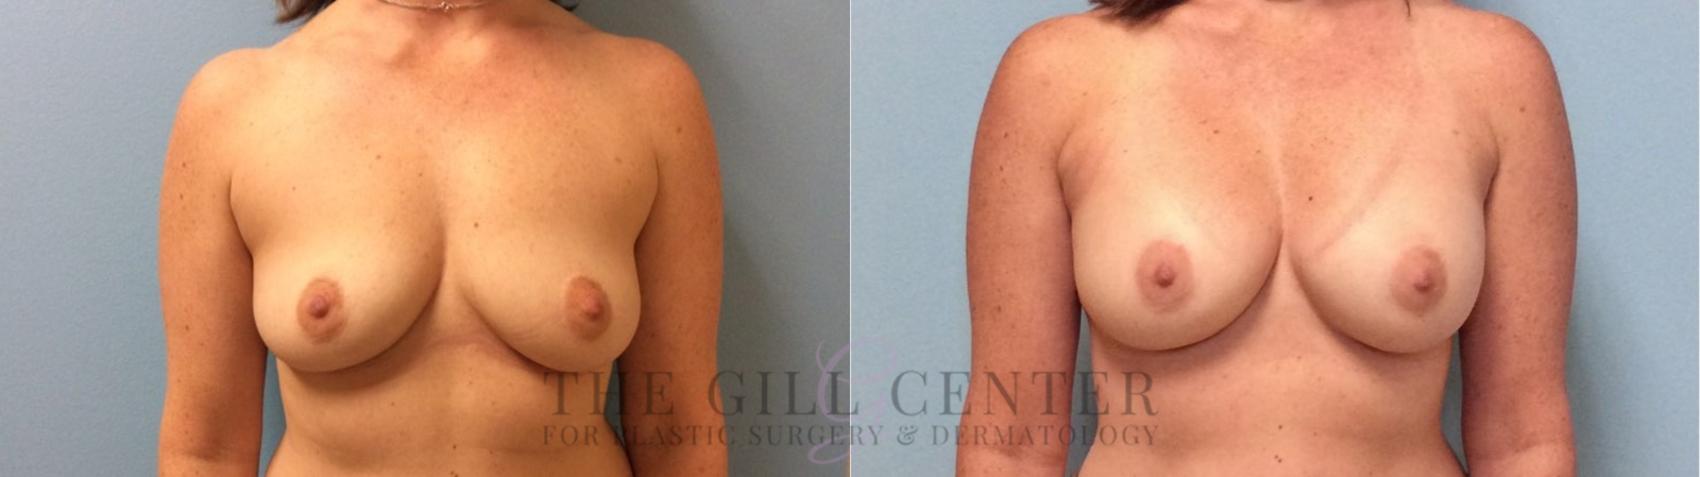 Breast Augmentation Case 74 Before & After Front | The Woodlands, TX | The Gill Center for Plastic Surgery and Dermatology